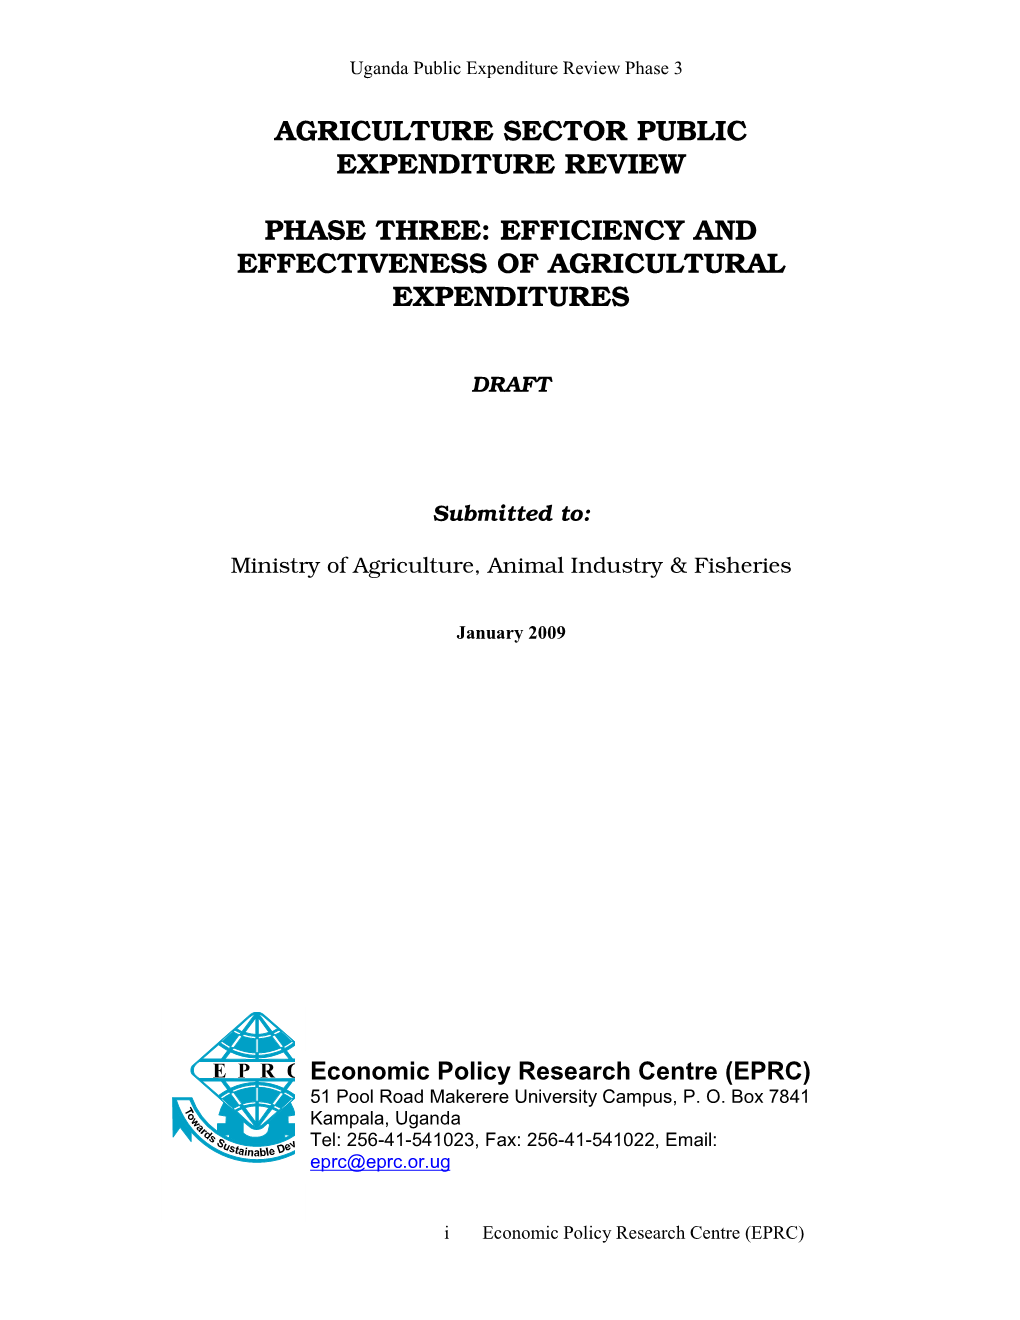 Efficiency and Effectiveness of Agricultural Expenditures